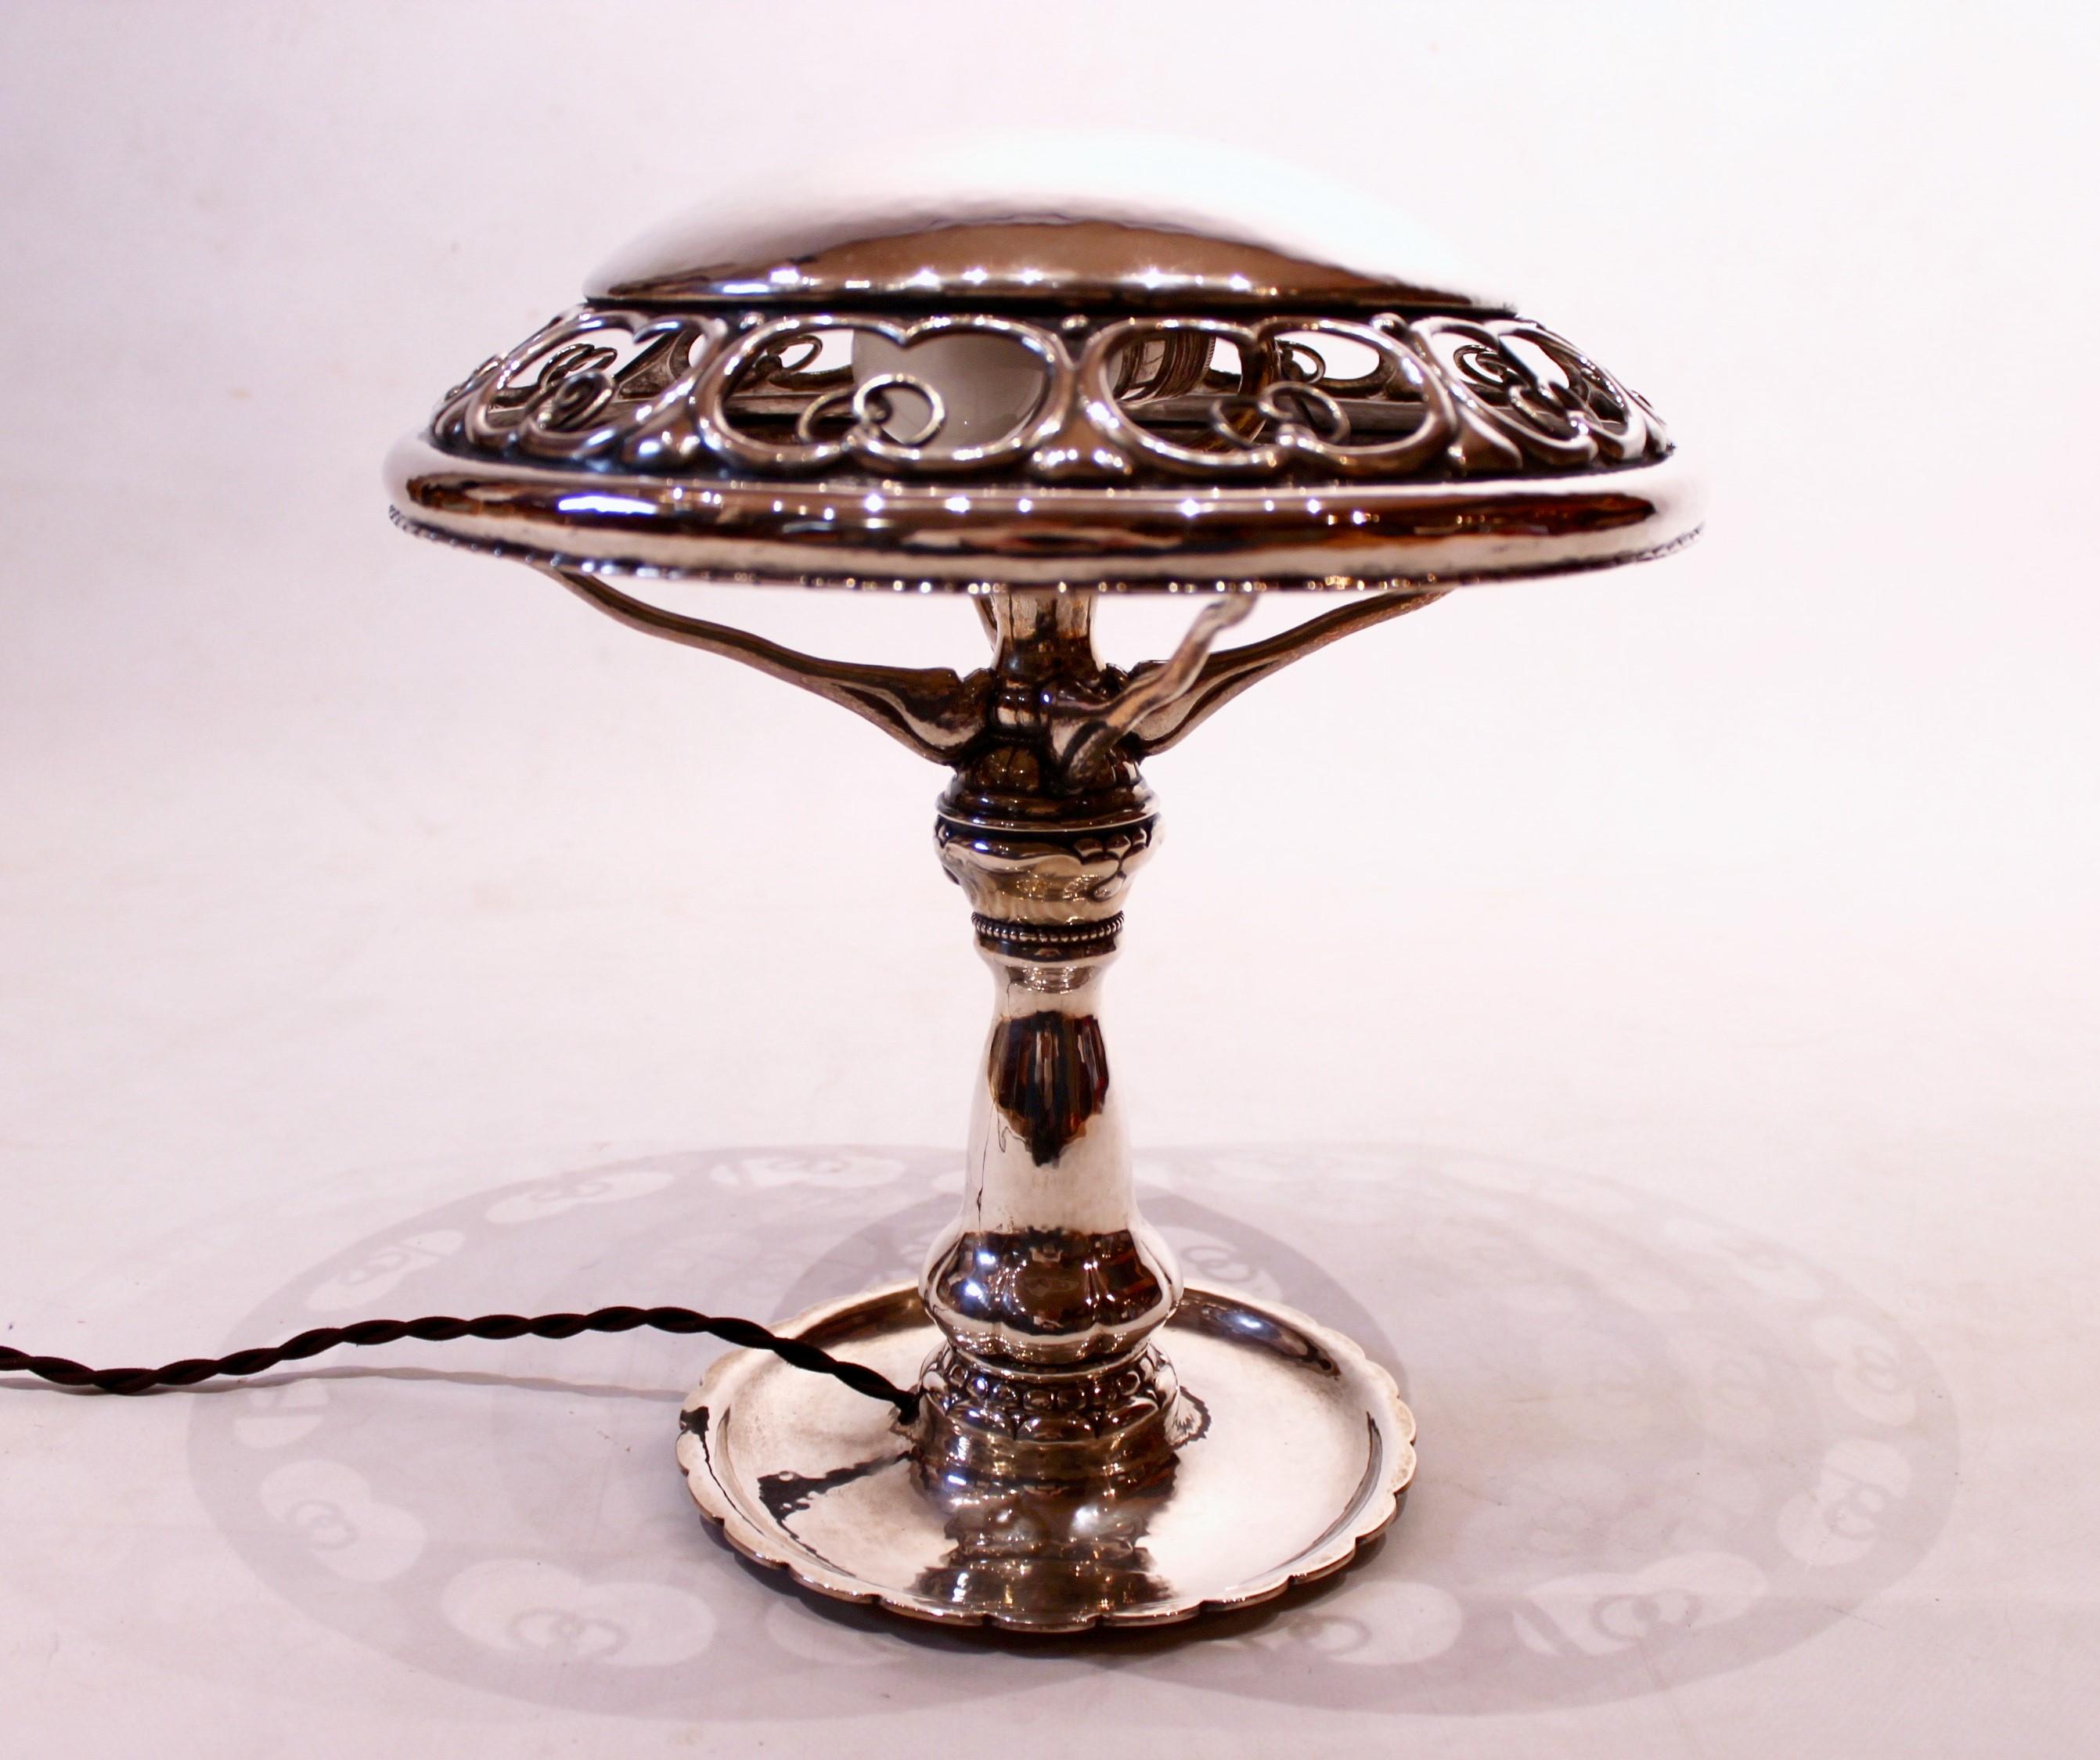 
The table lamp is crafted from solid silver and adorned with beautiful decorations, reflecting the aesthetic and elegance typical of antique items. The lamp is in excellent antique condition, radiating a timeless beauty that will add a touch of